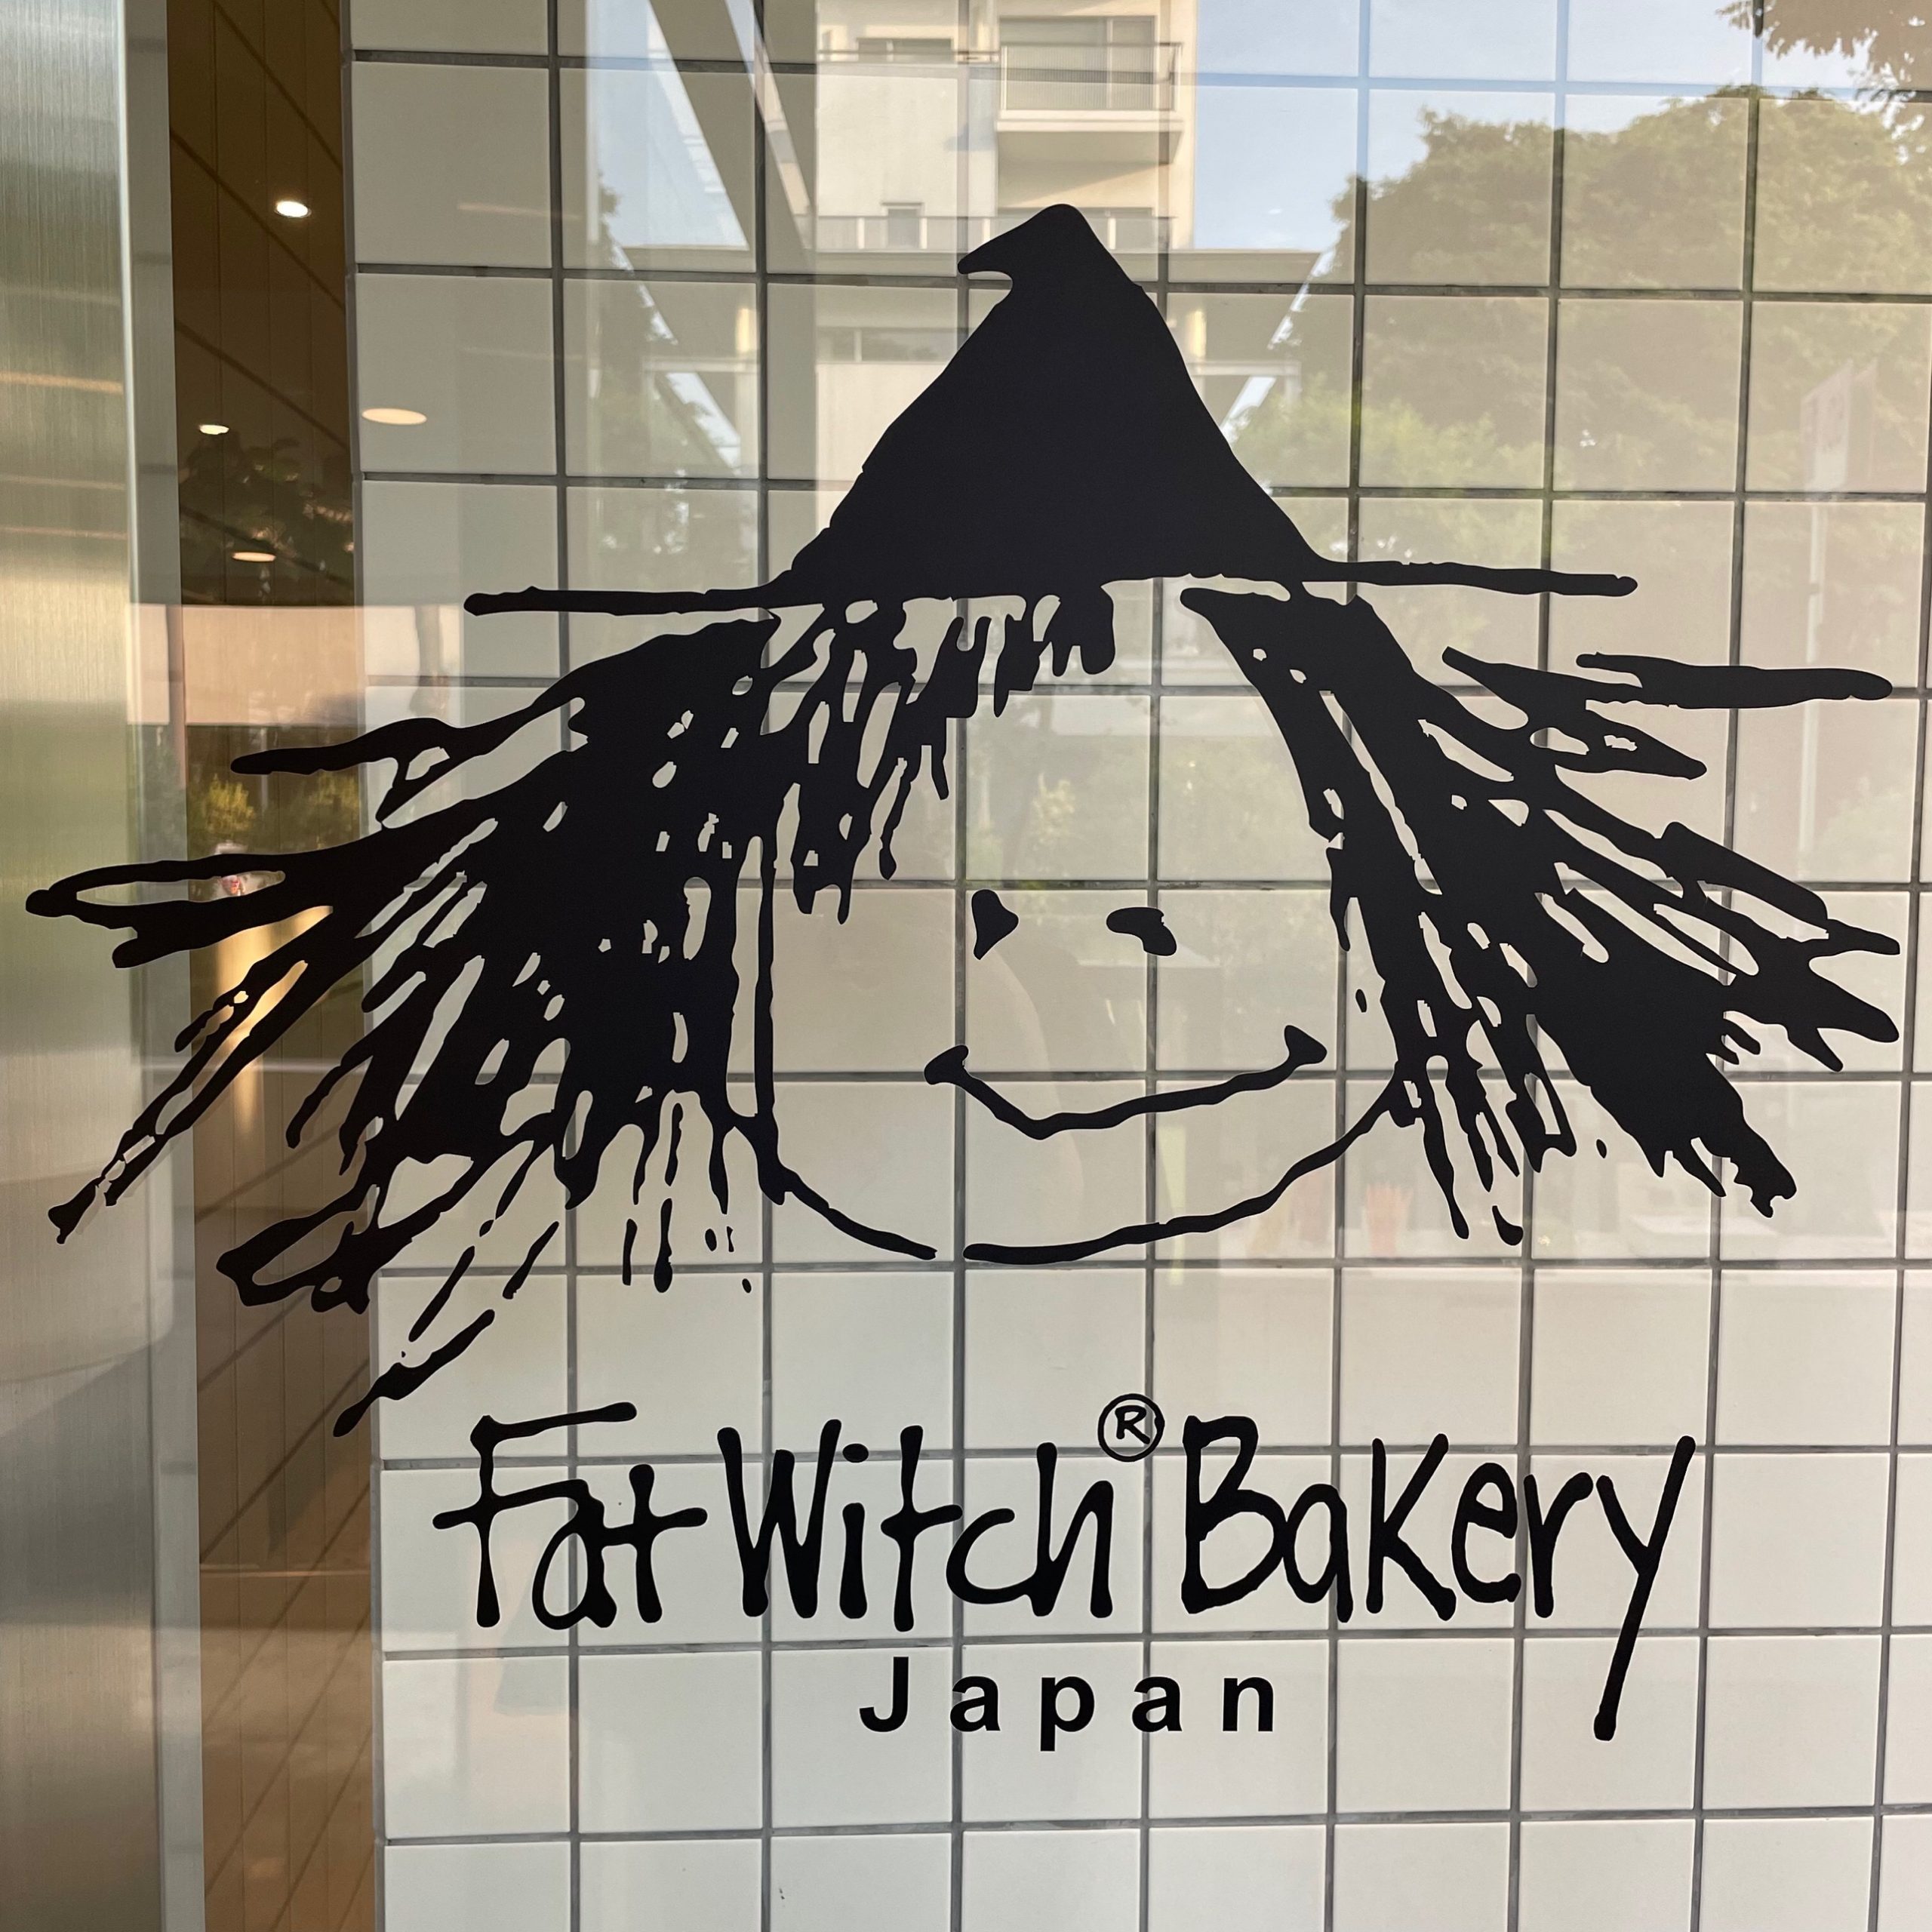 Fat Witch Bakery 代官山店(東京)のご紹介です